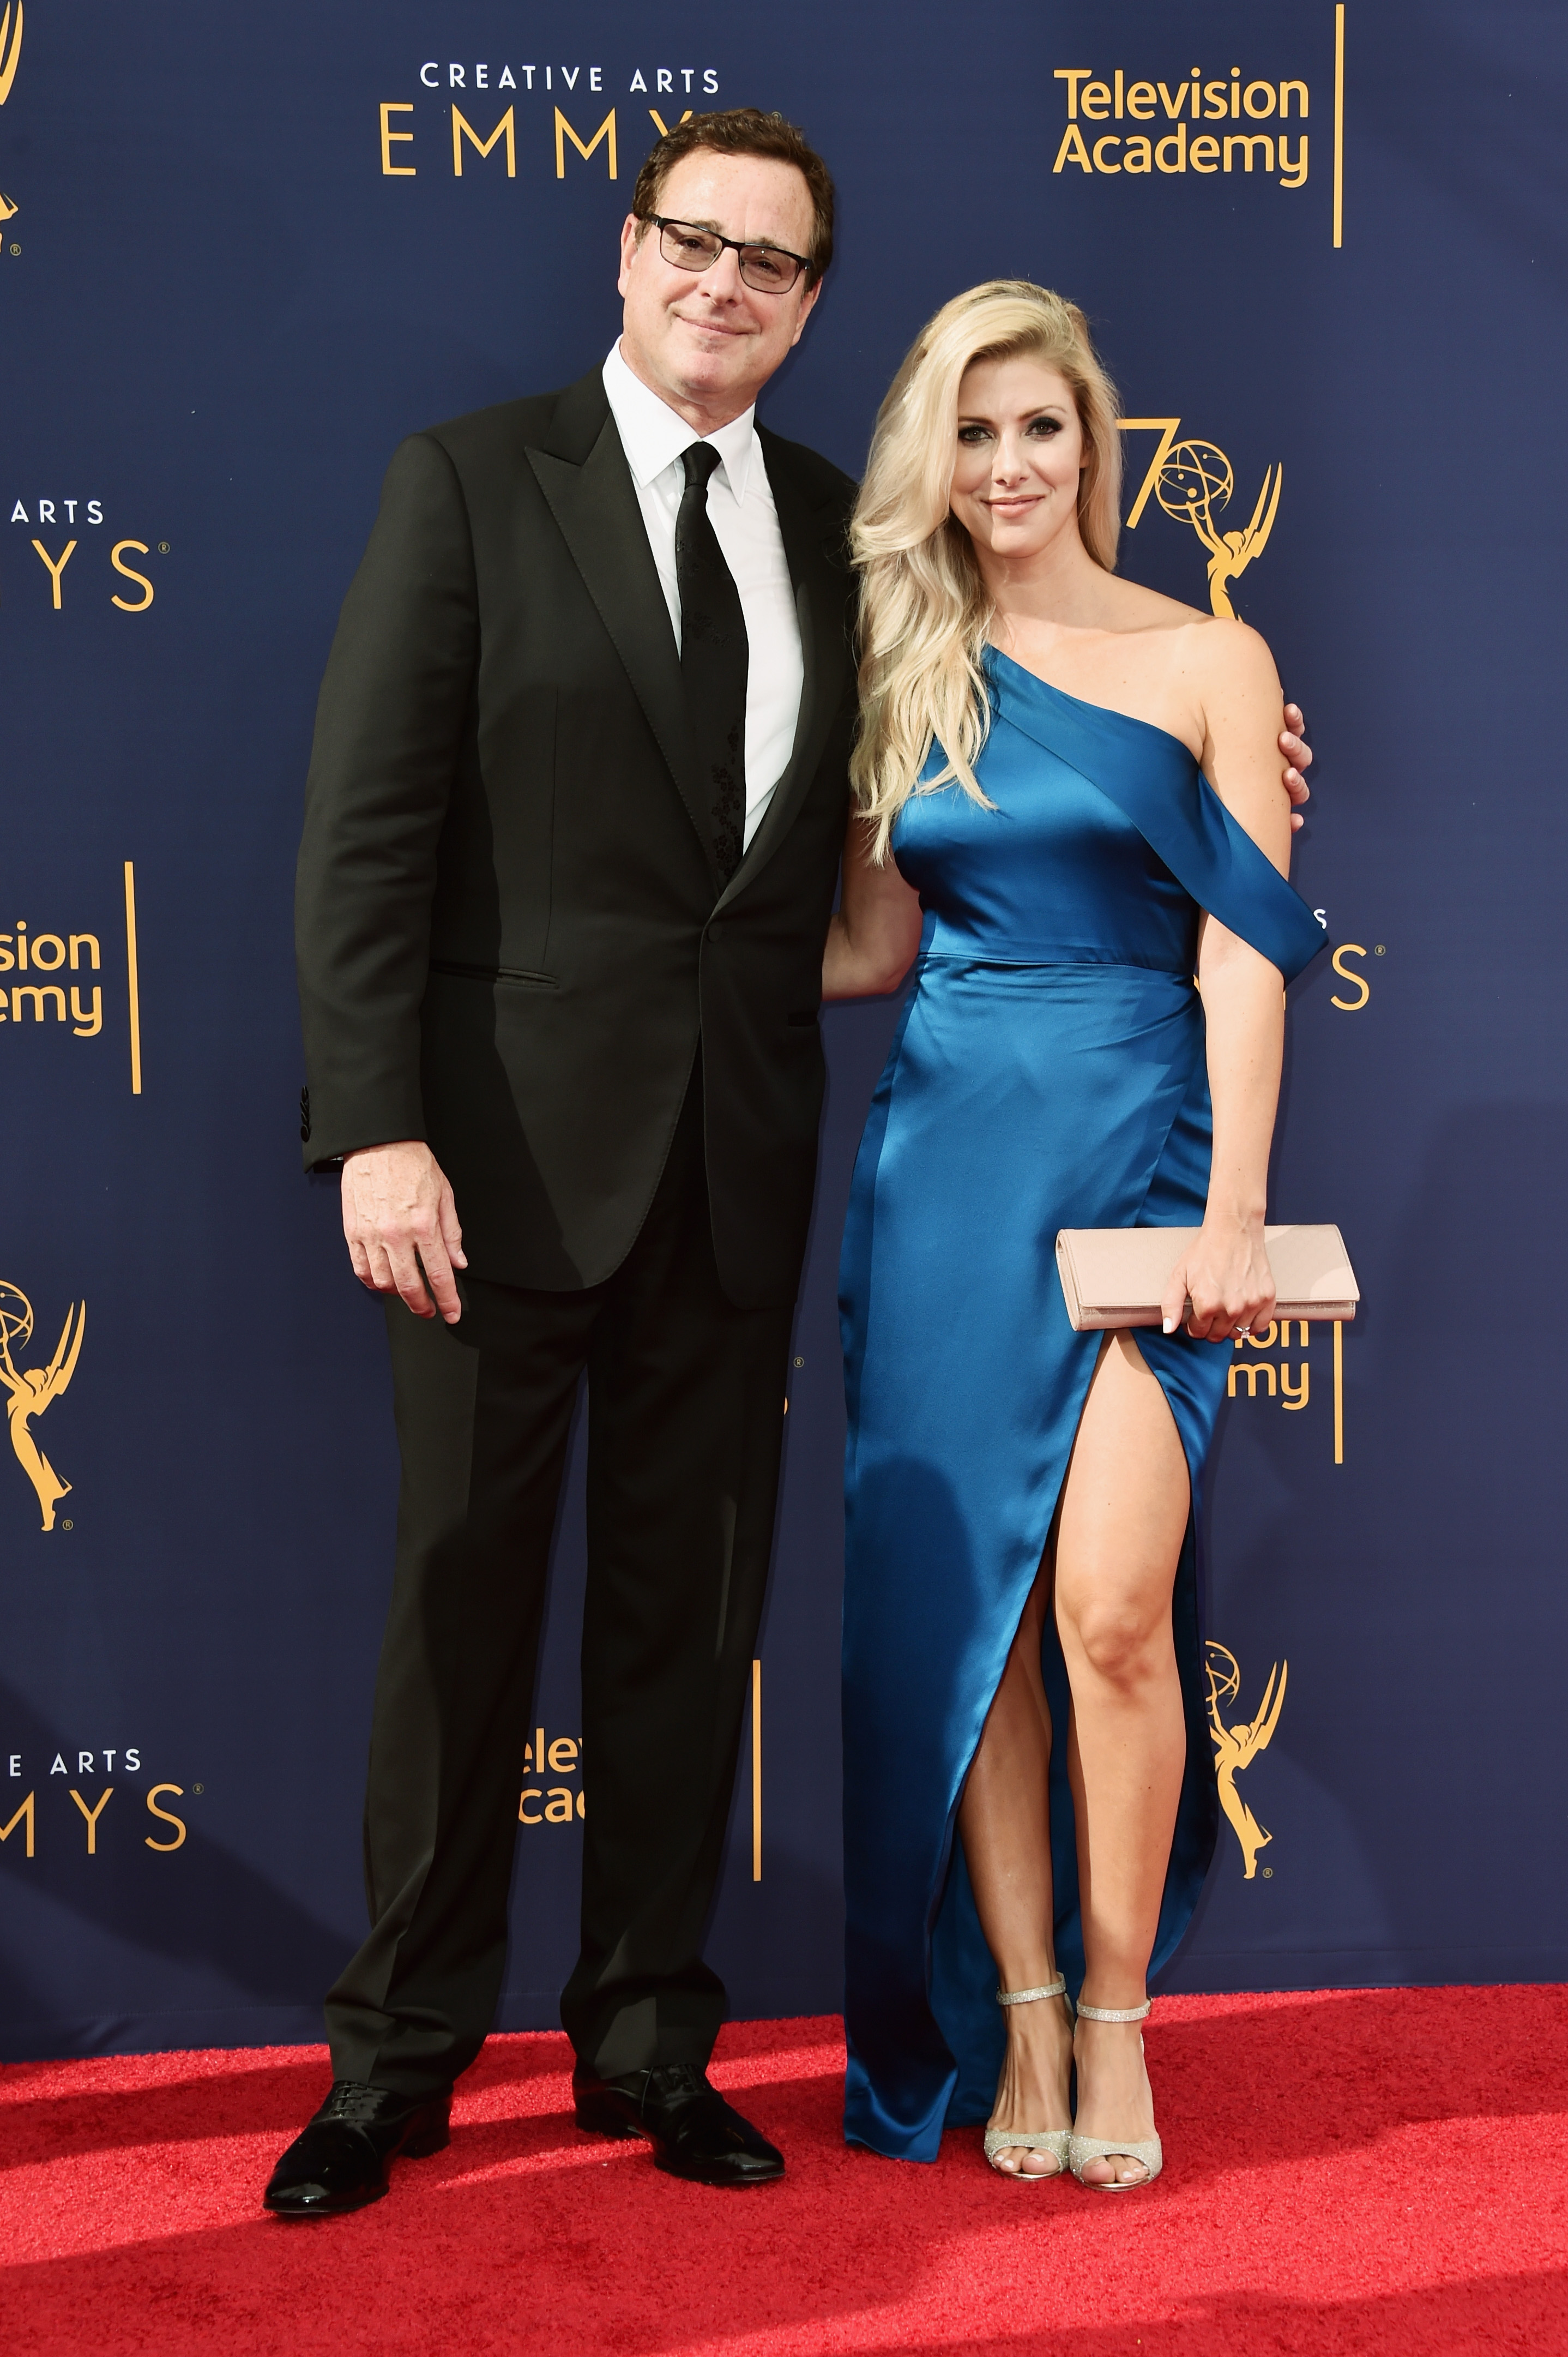 Bob Saget and Kelly Rizzo attend the Creative Arts Emmy Awards at Microsoft Theater in Los Angeles, California on September 8, 2018. | Source: Getty Images